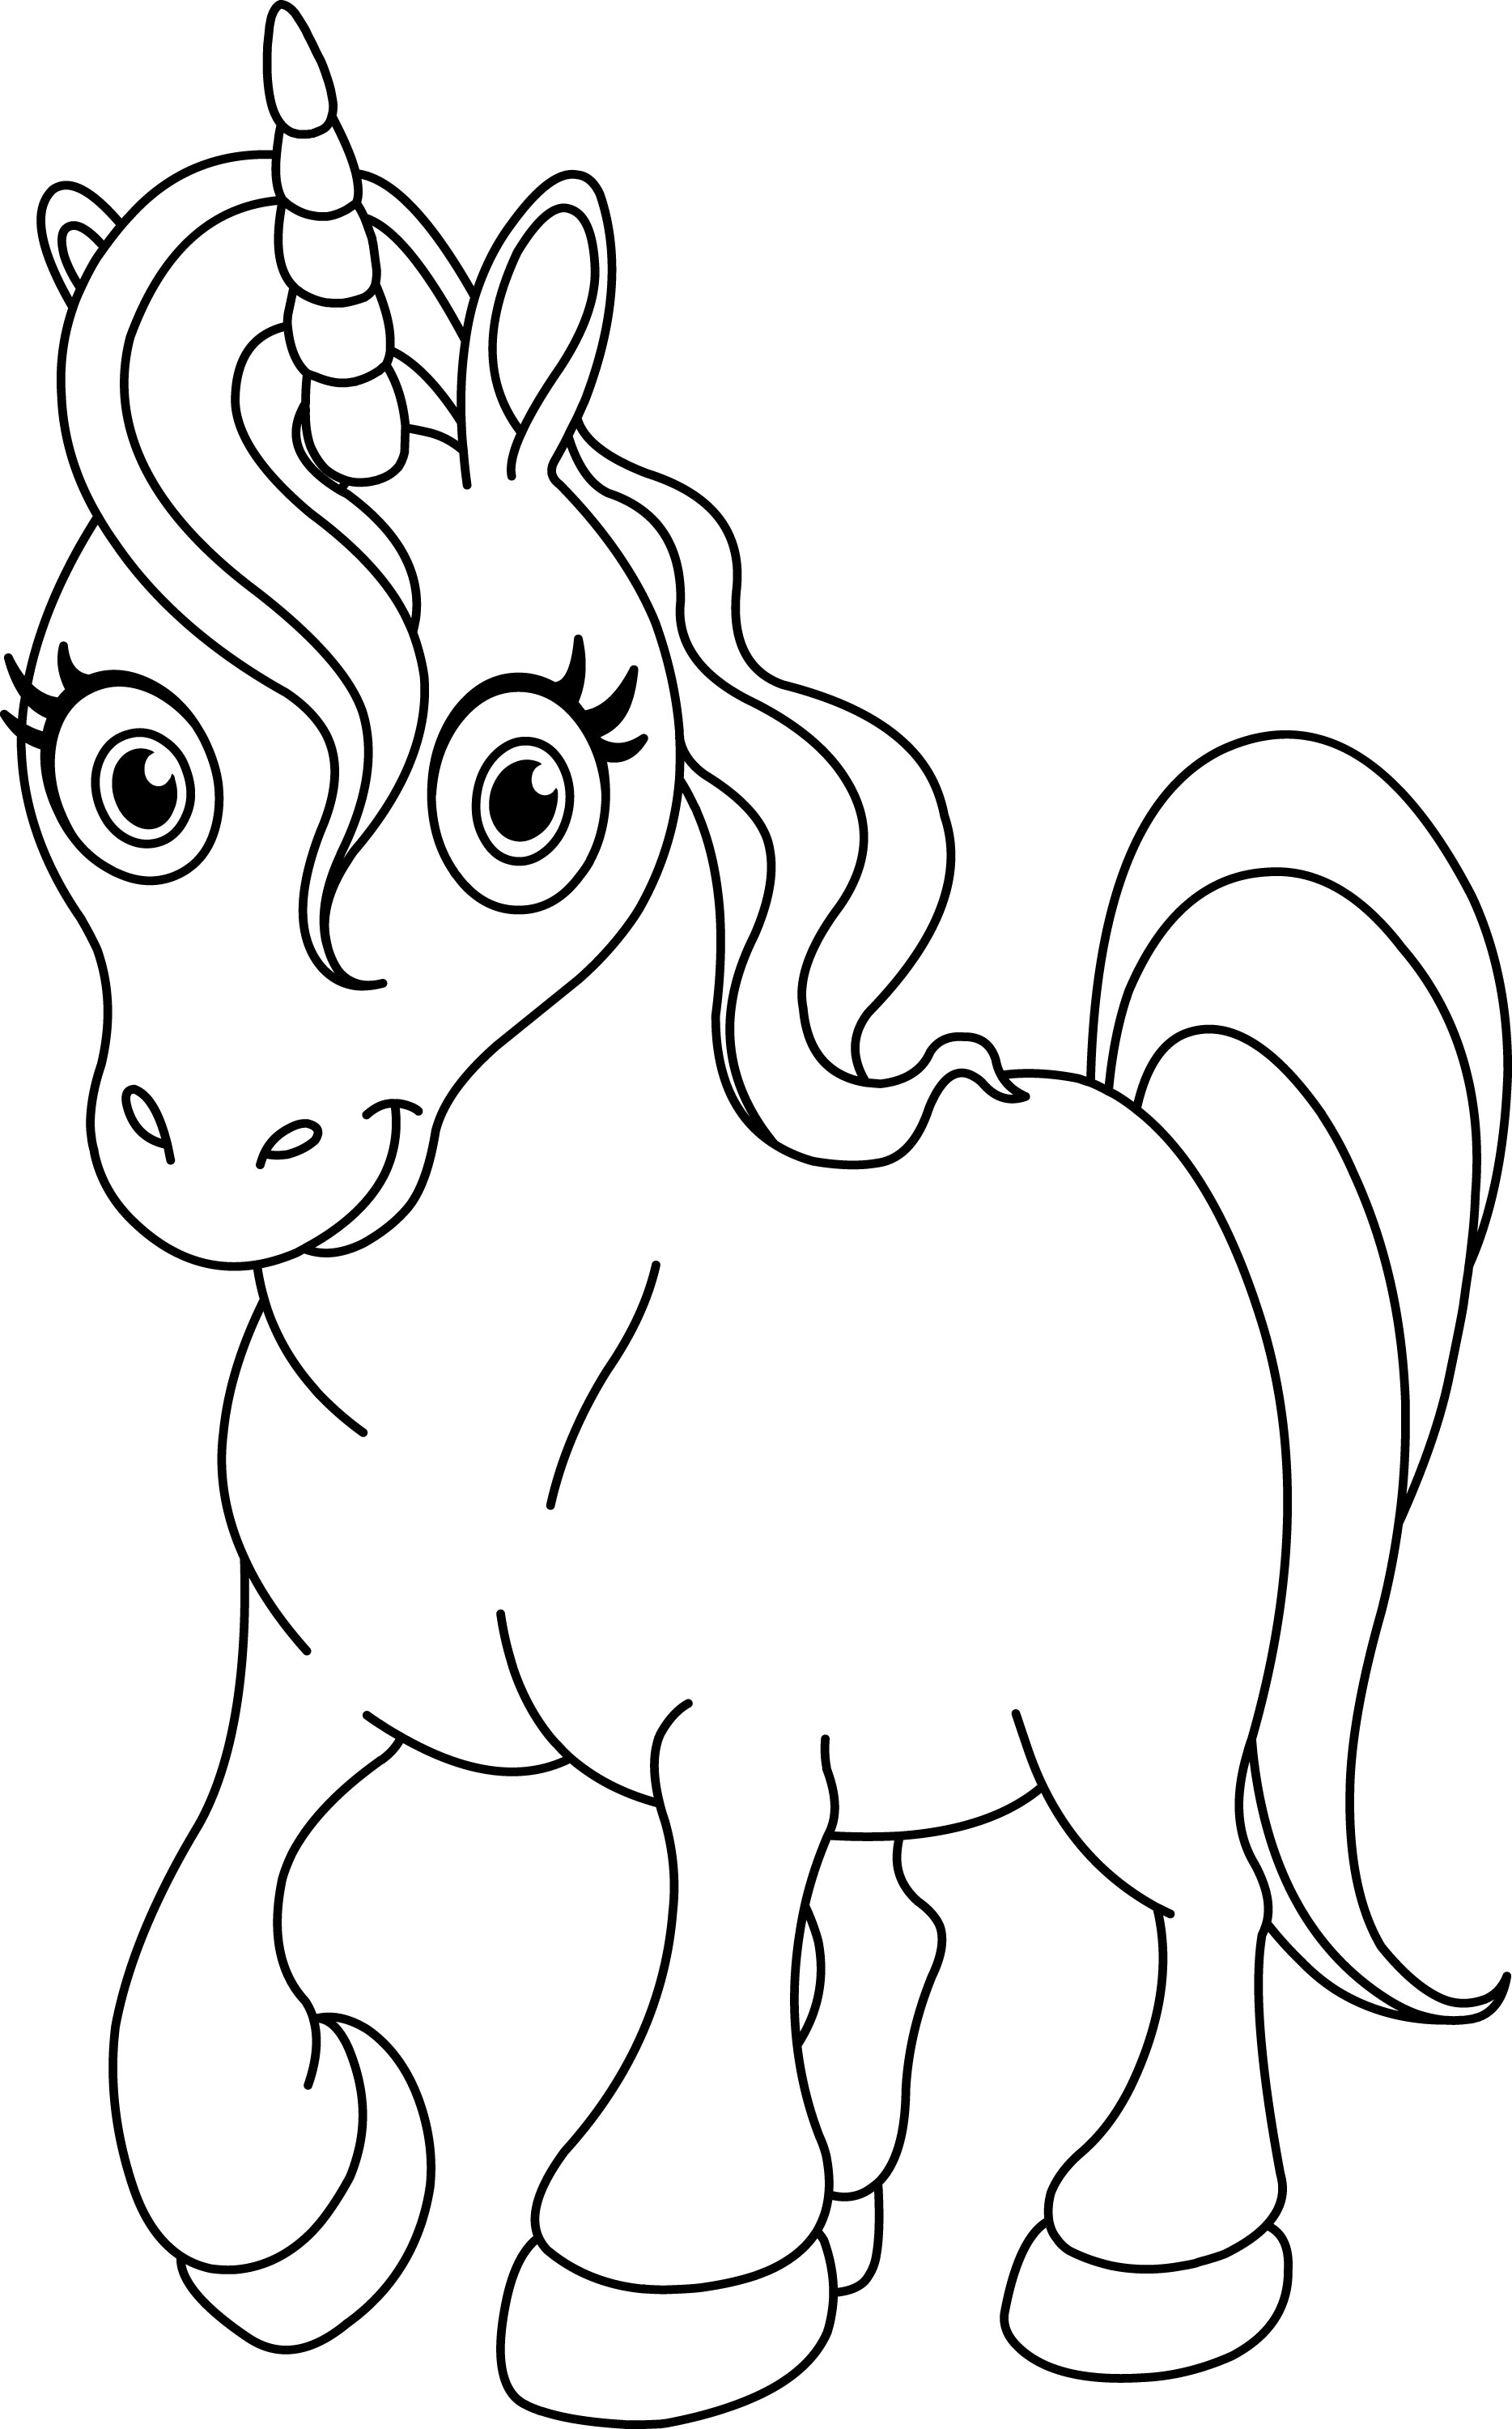 Top Unicorn Pictures To Print Coloring Page